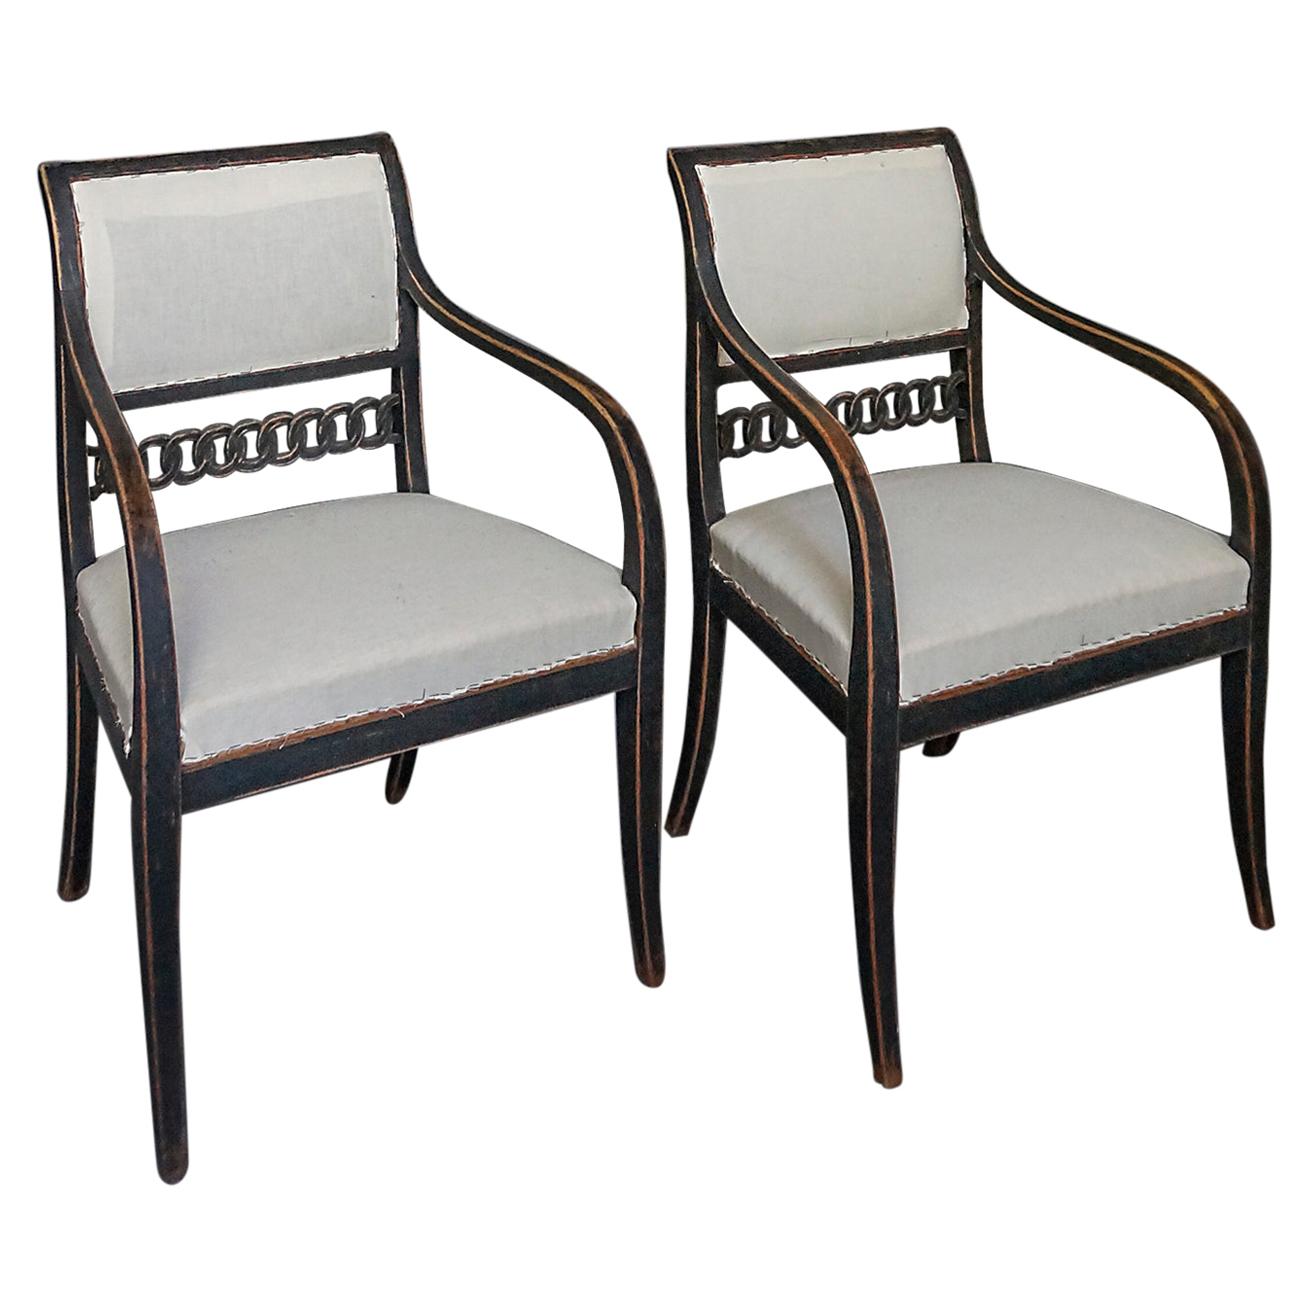 Pair of Period Neoclassical Armchairs